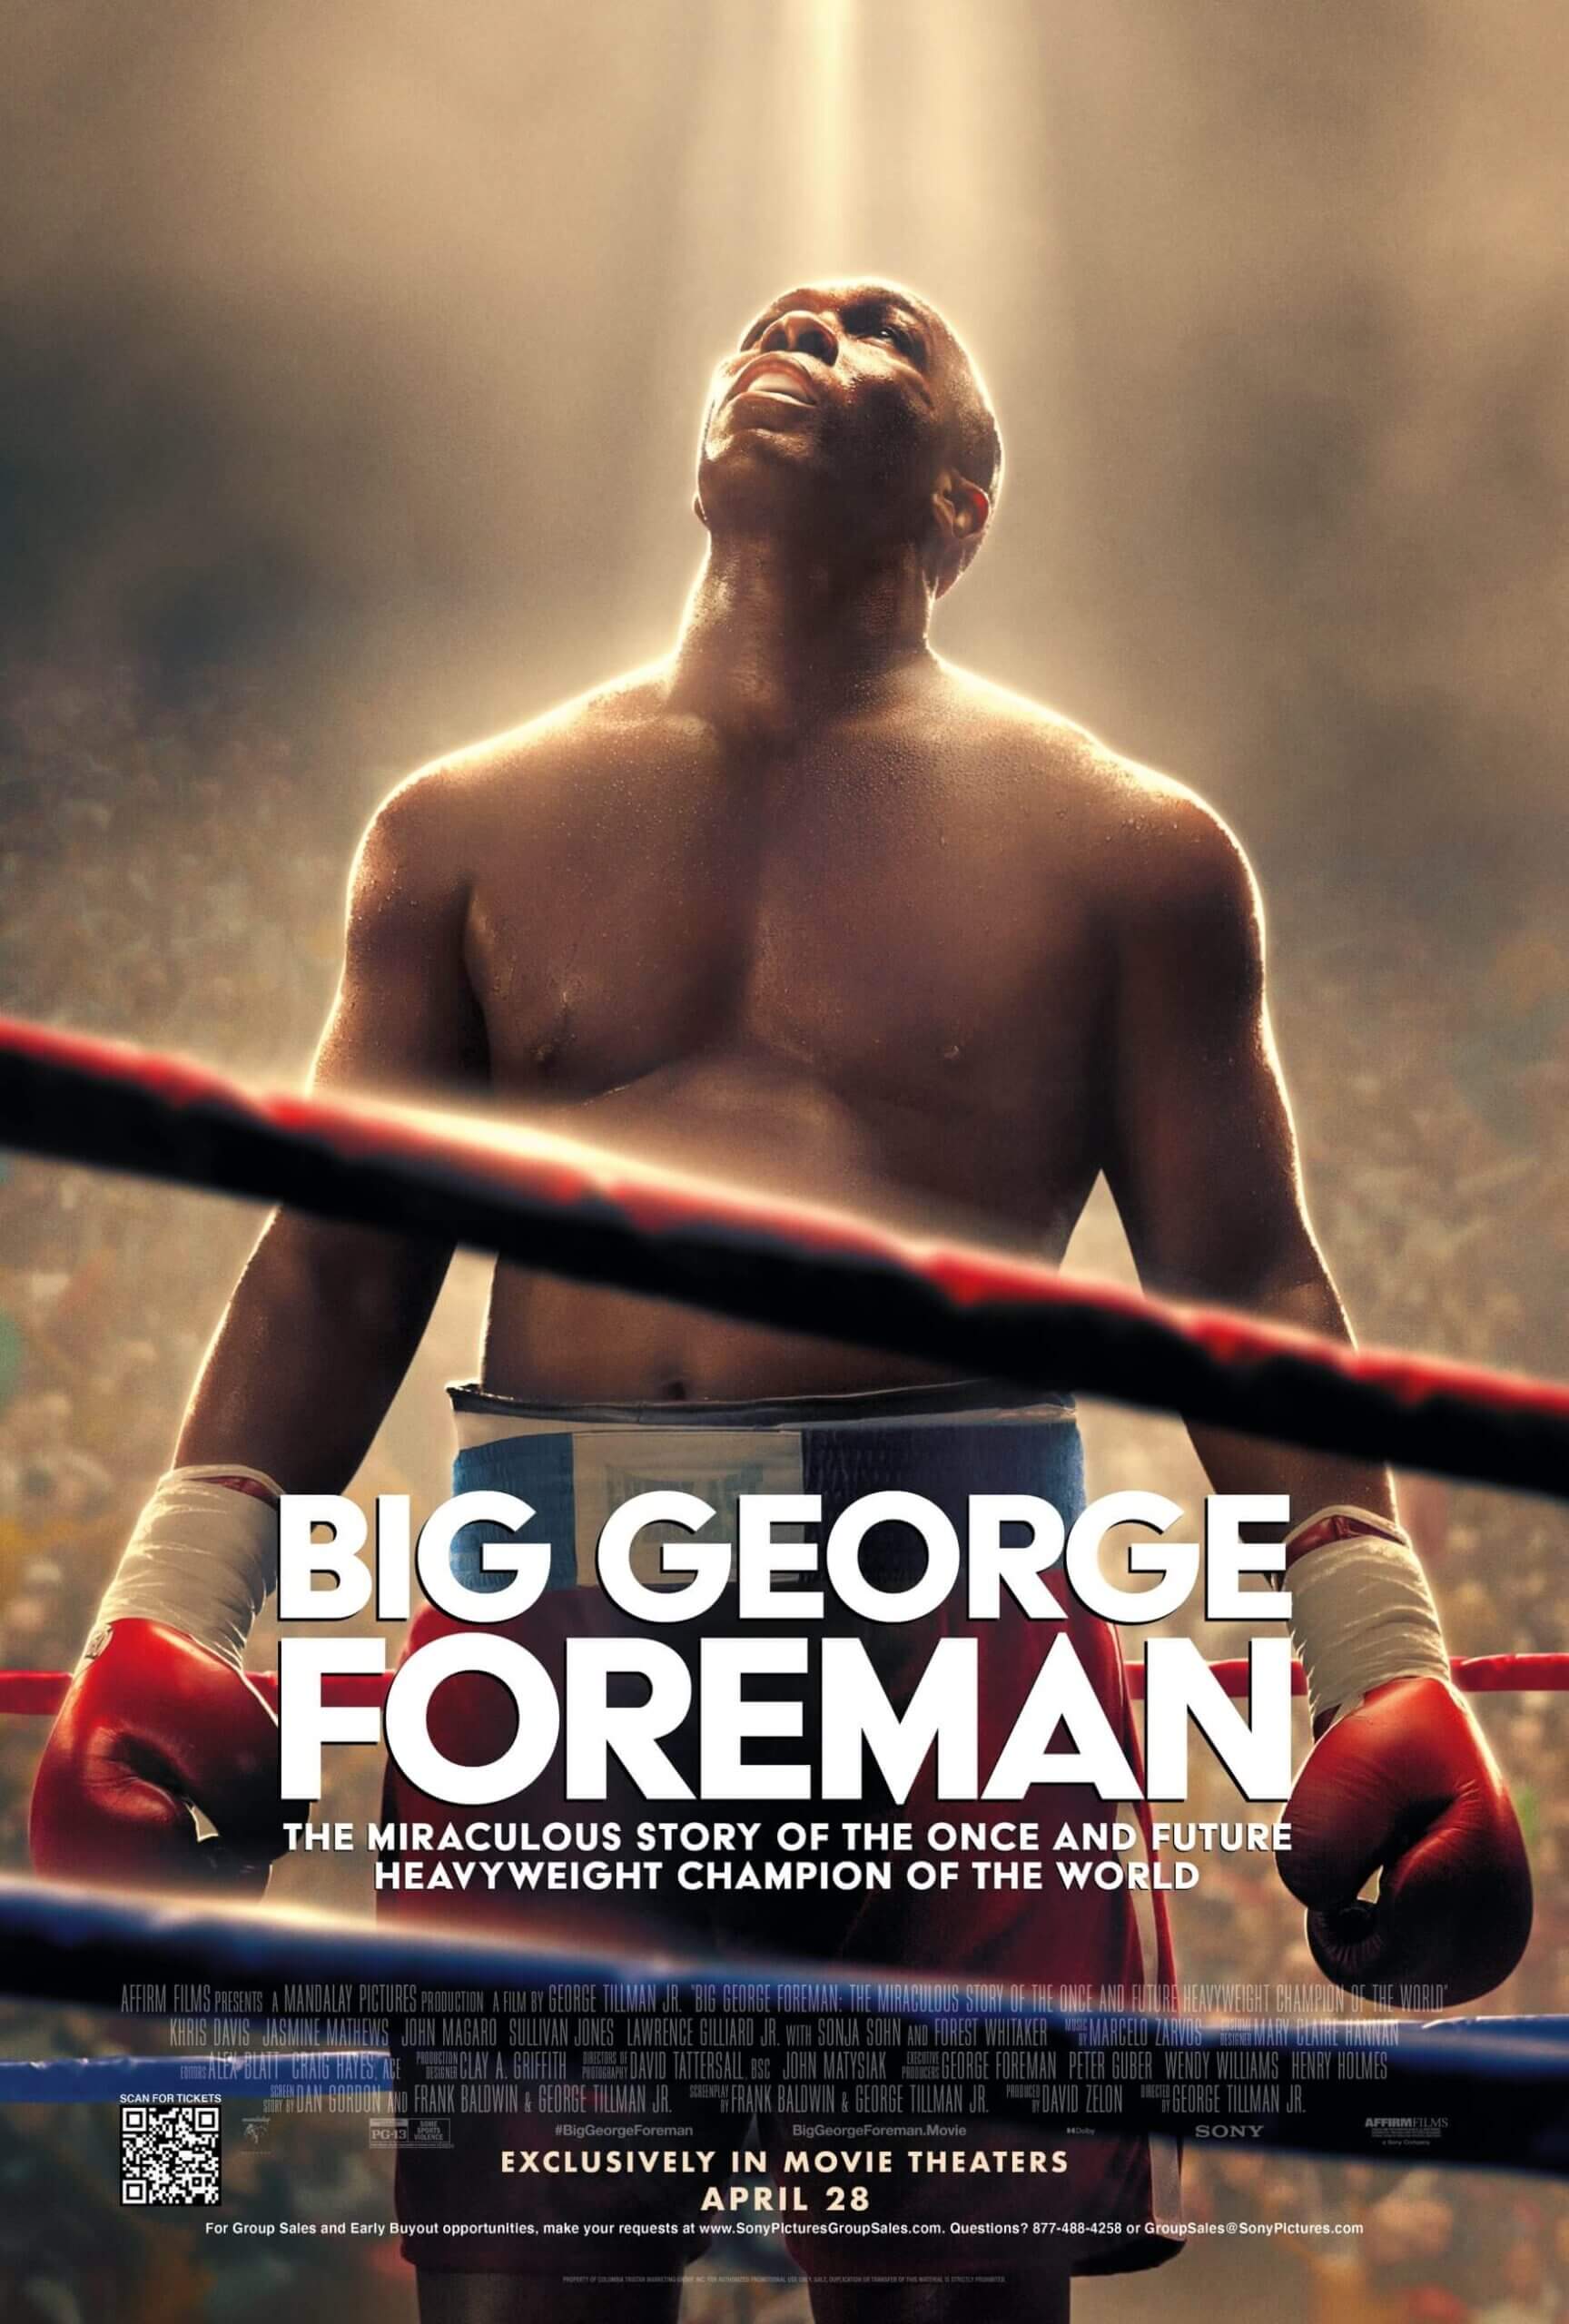 Big George Foreman Movie Review: A Remarkable Comeback Story that Inspires and Moves Audiences